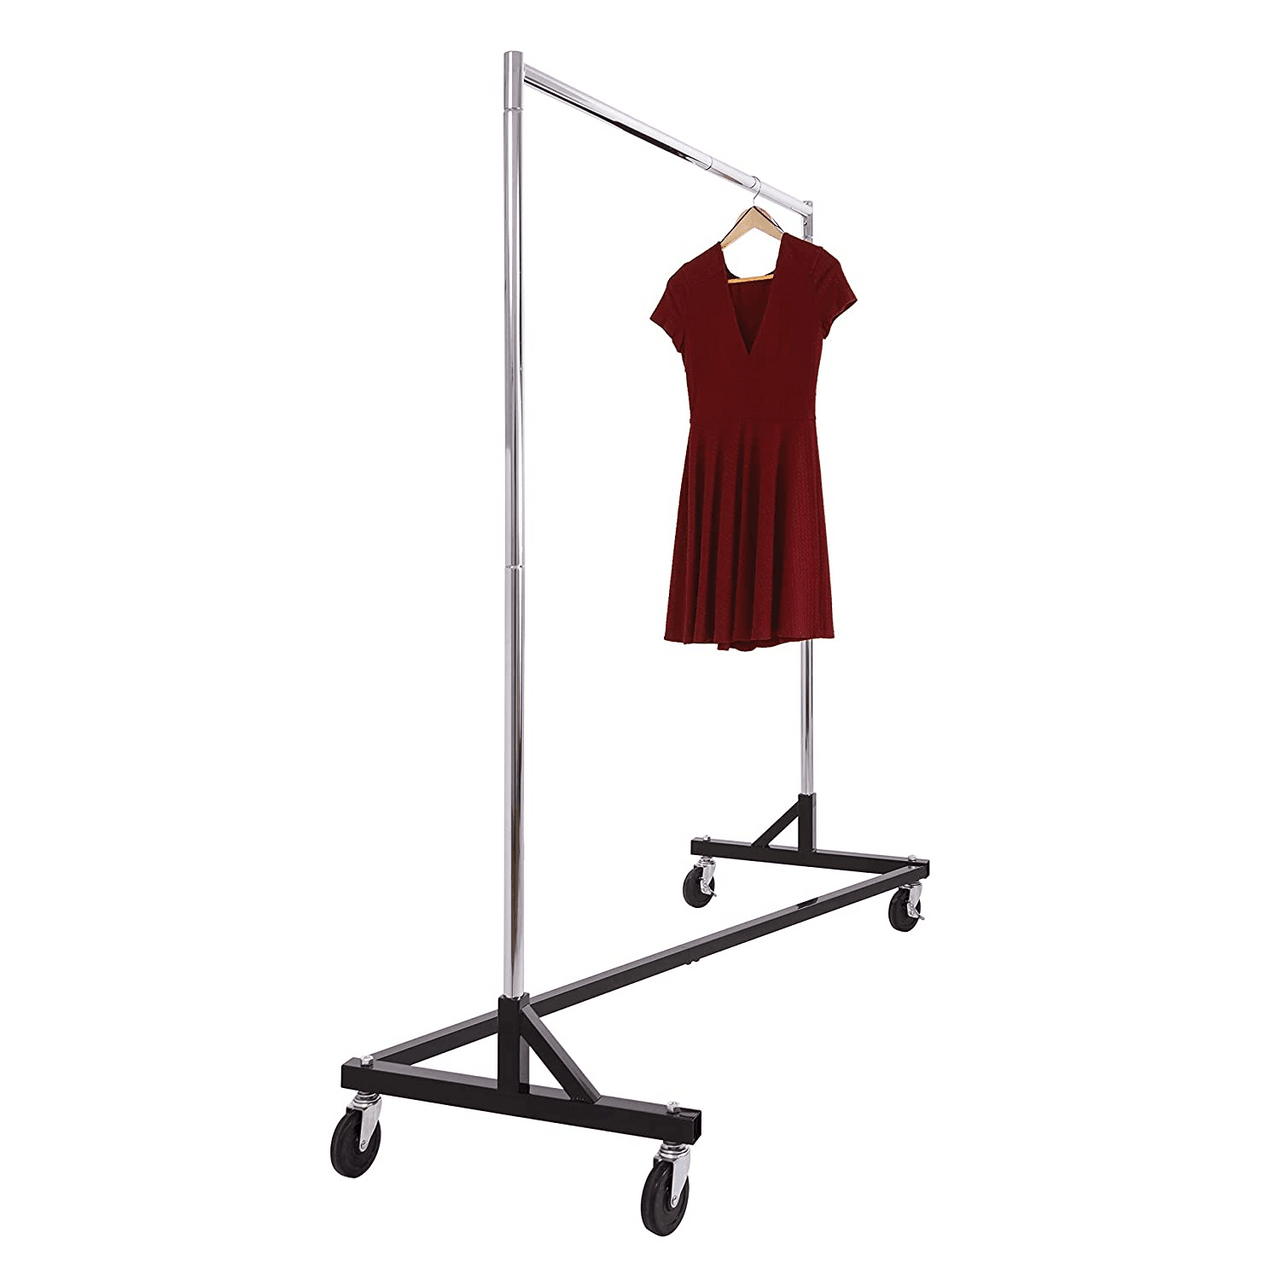 Heavy Duty Single Rail Clothes Z Rack - 150kgs Weight Capacity - W/ Four Large Rubber Casters - Hangersforless